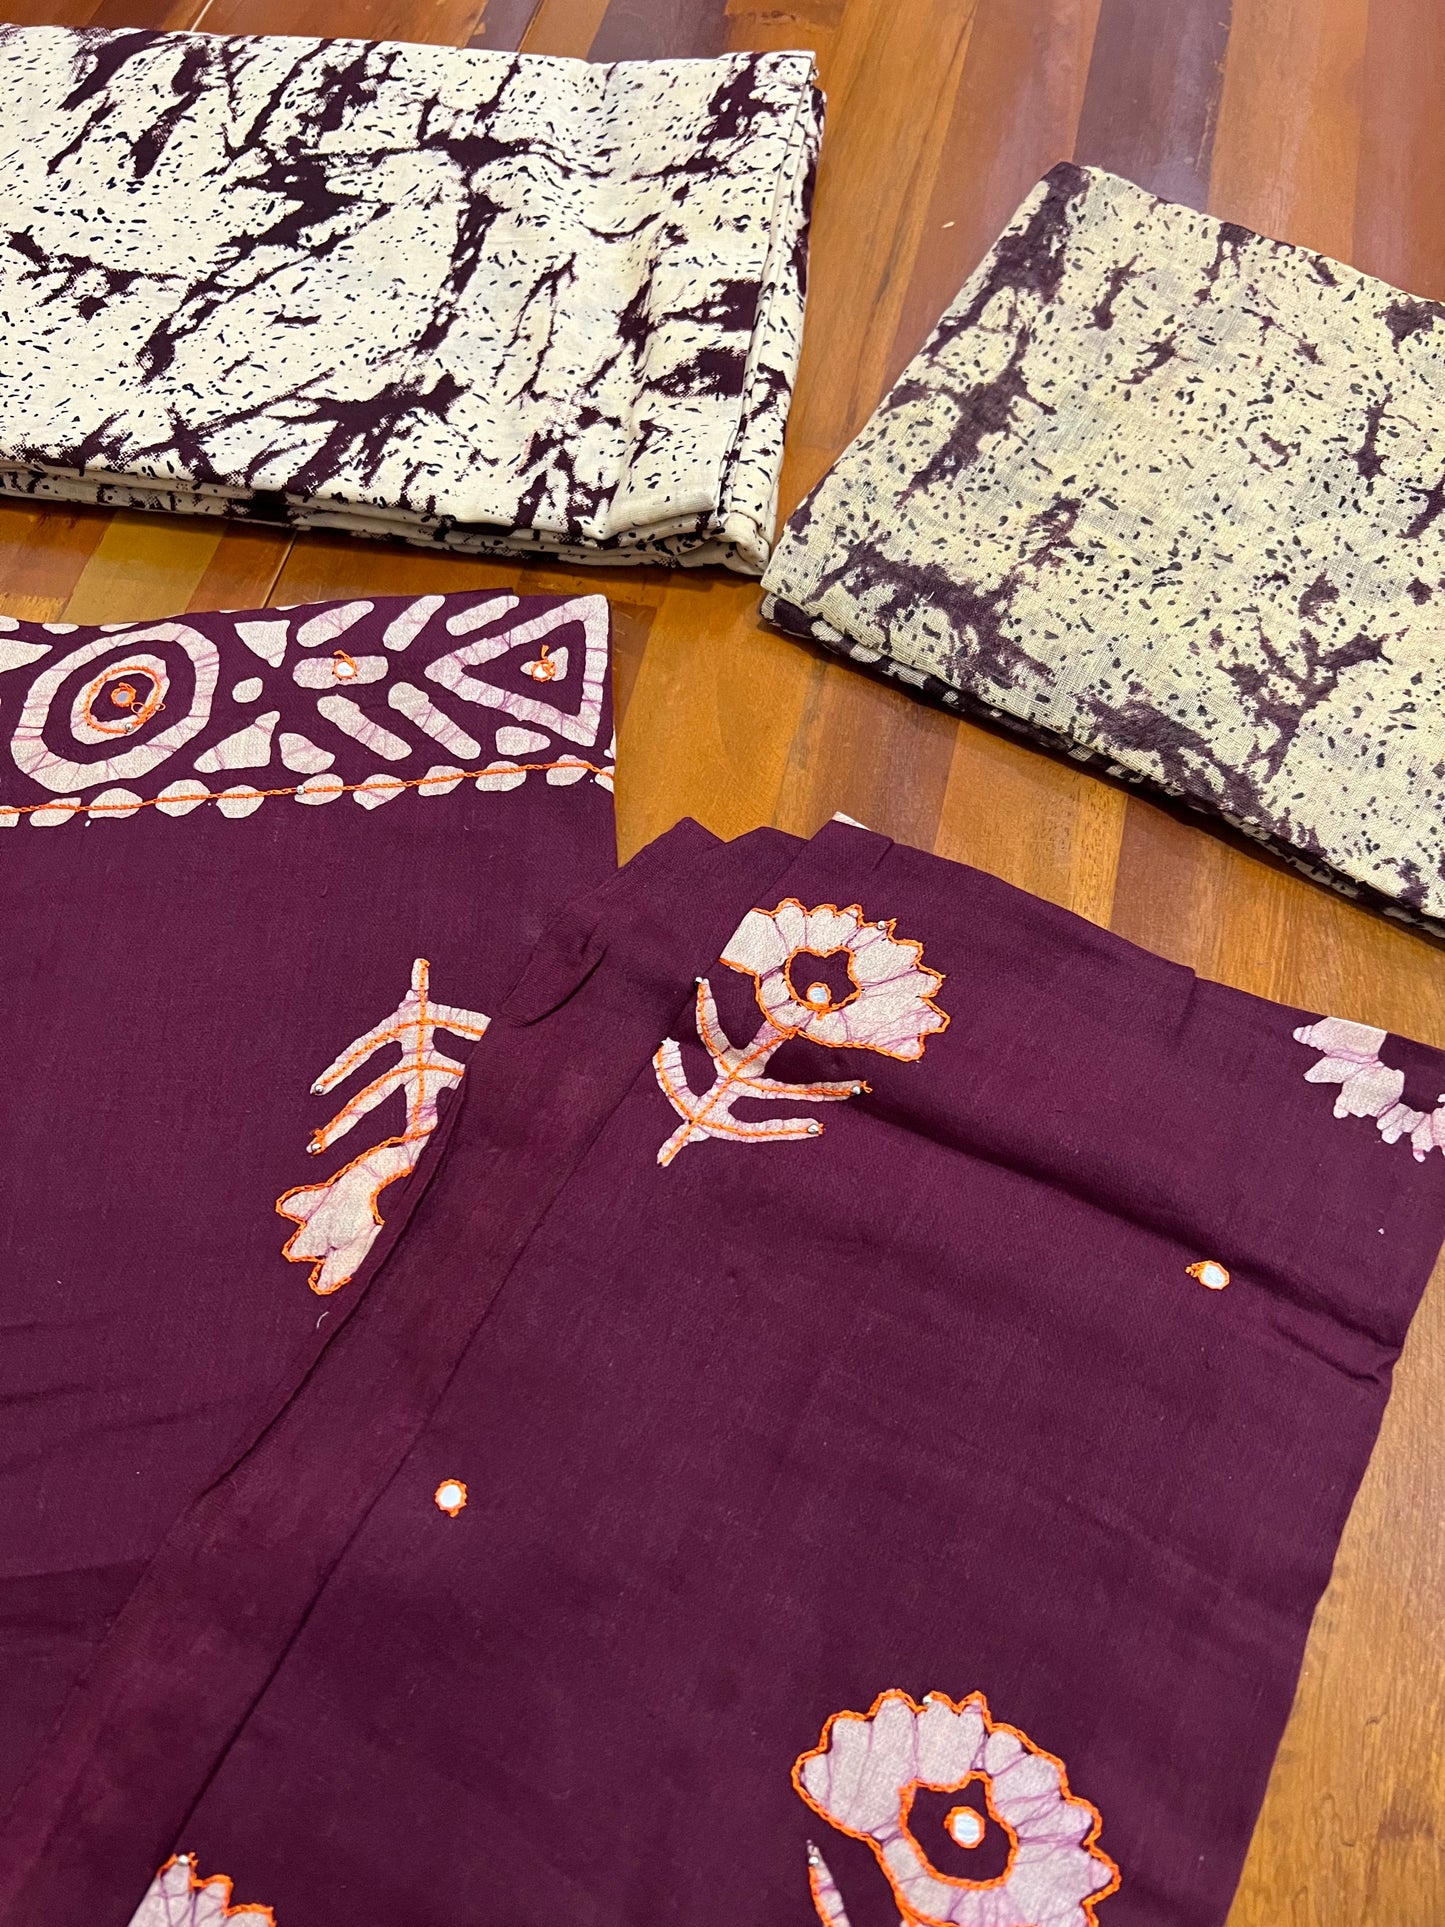 Southloom™ Cotton Churidar Salwar Suit Material in Maroon with Floral Printed Design